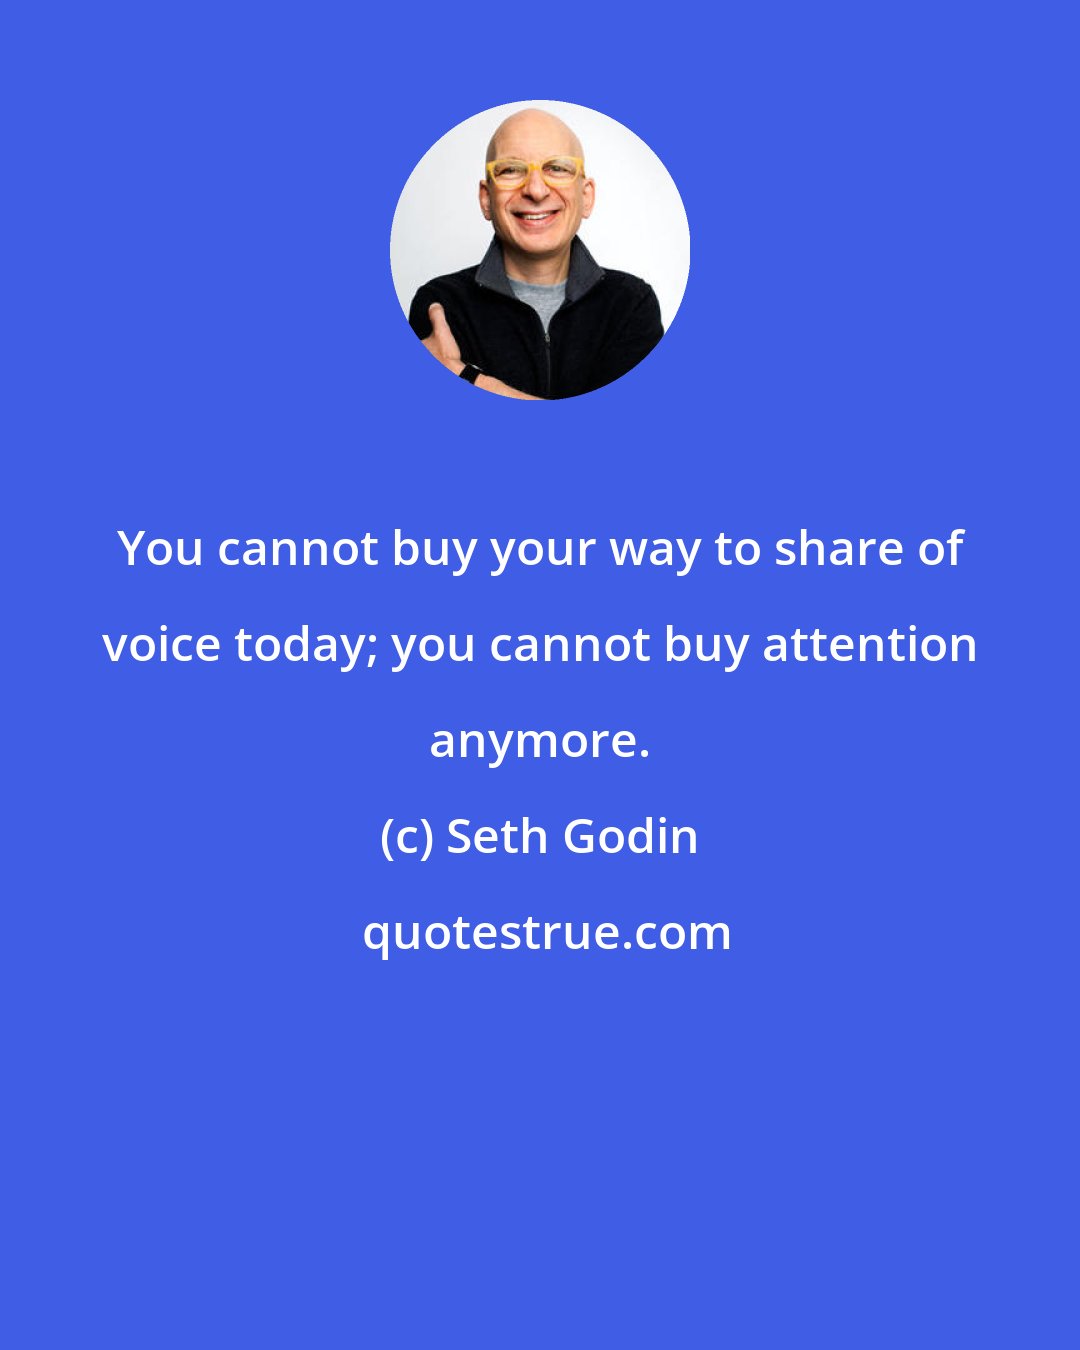 Seth Godin: You cannot buy your way to share of voice today; you cannot buy attention anymore.